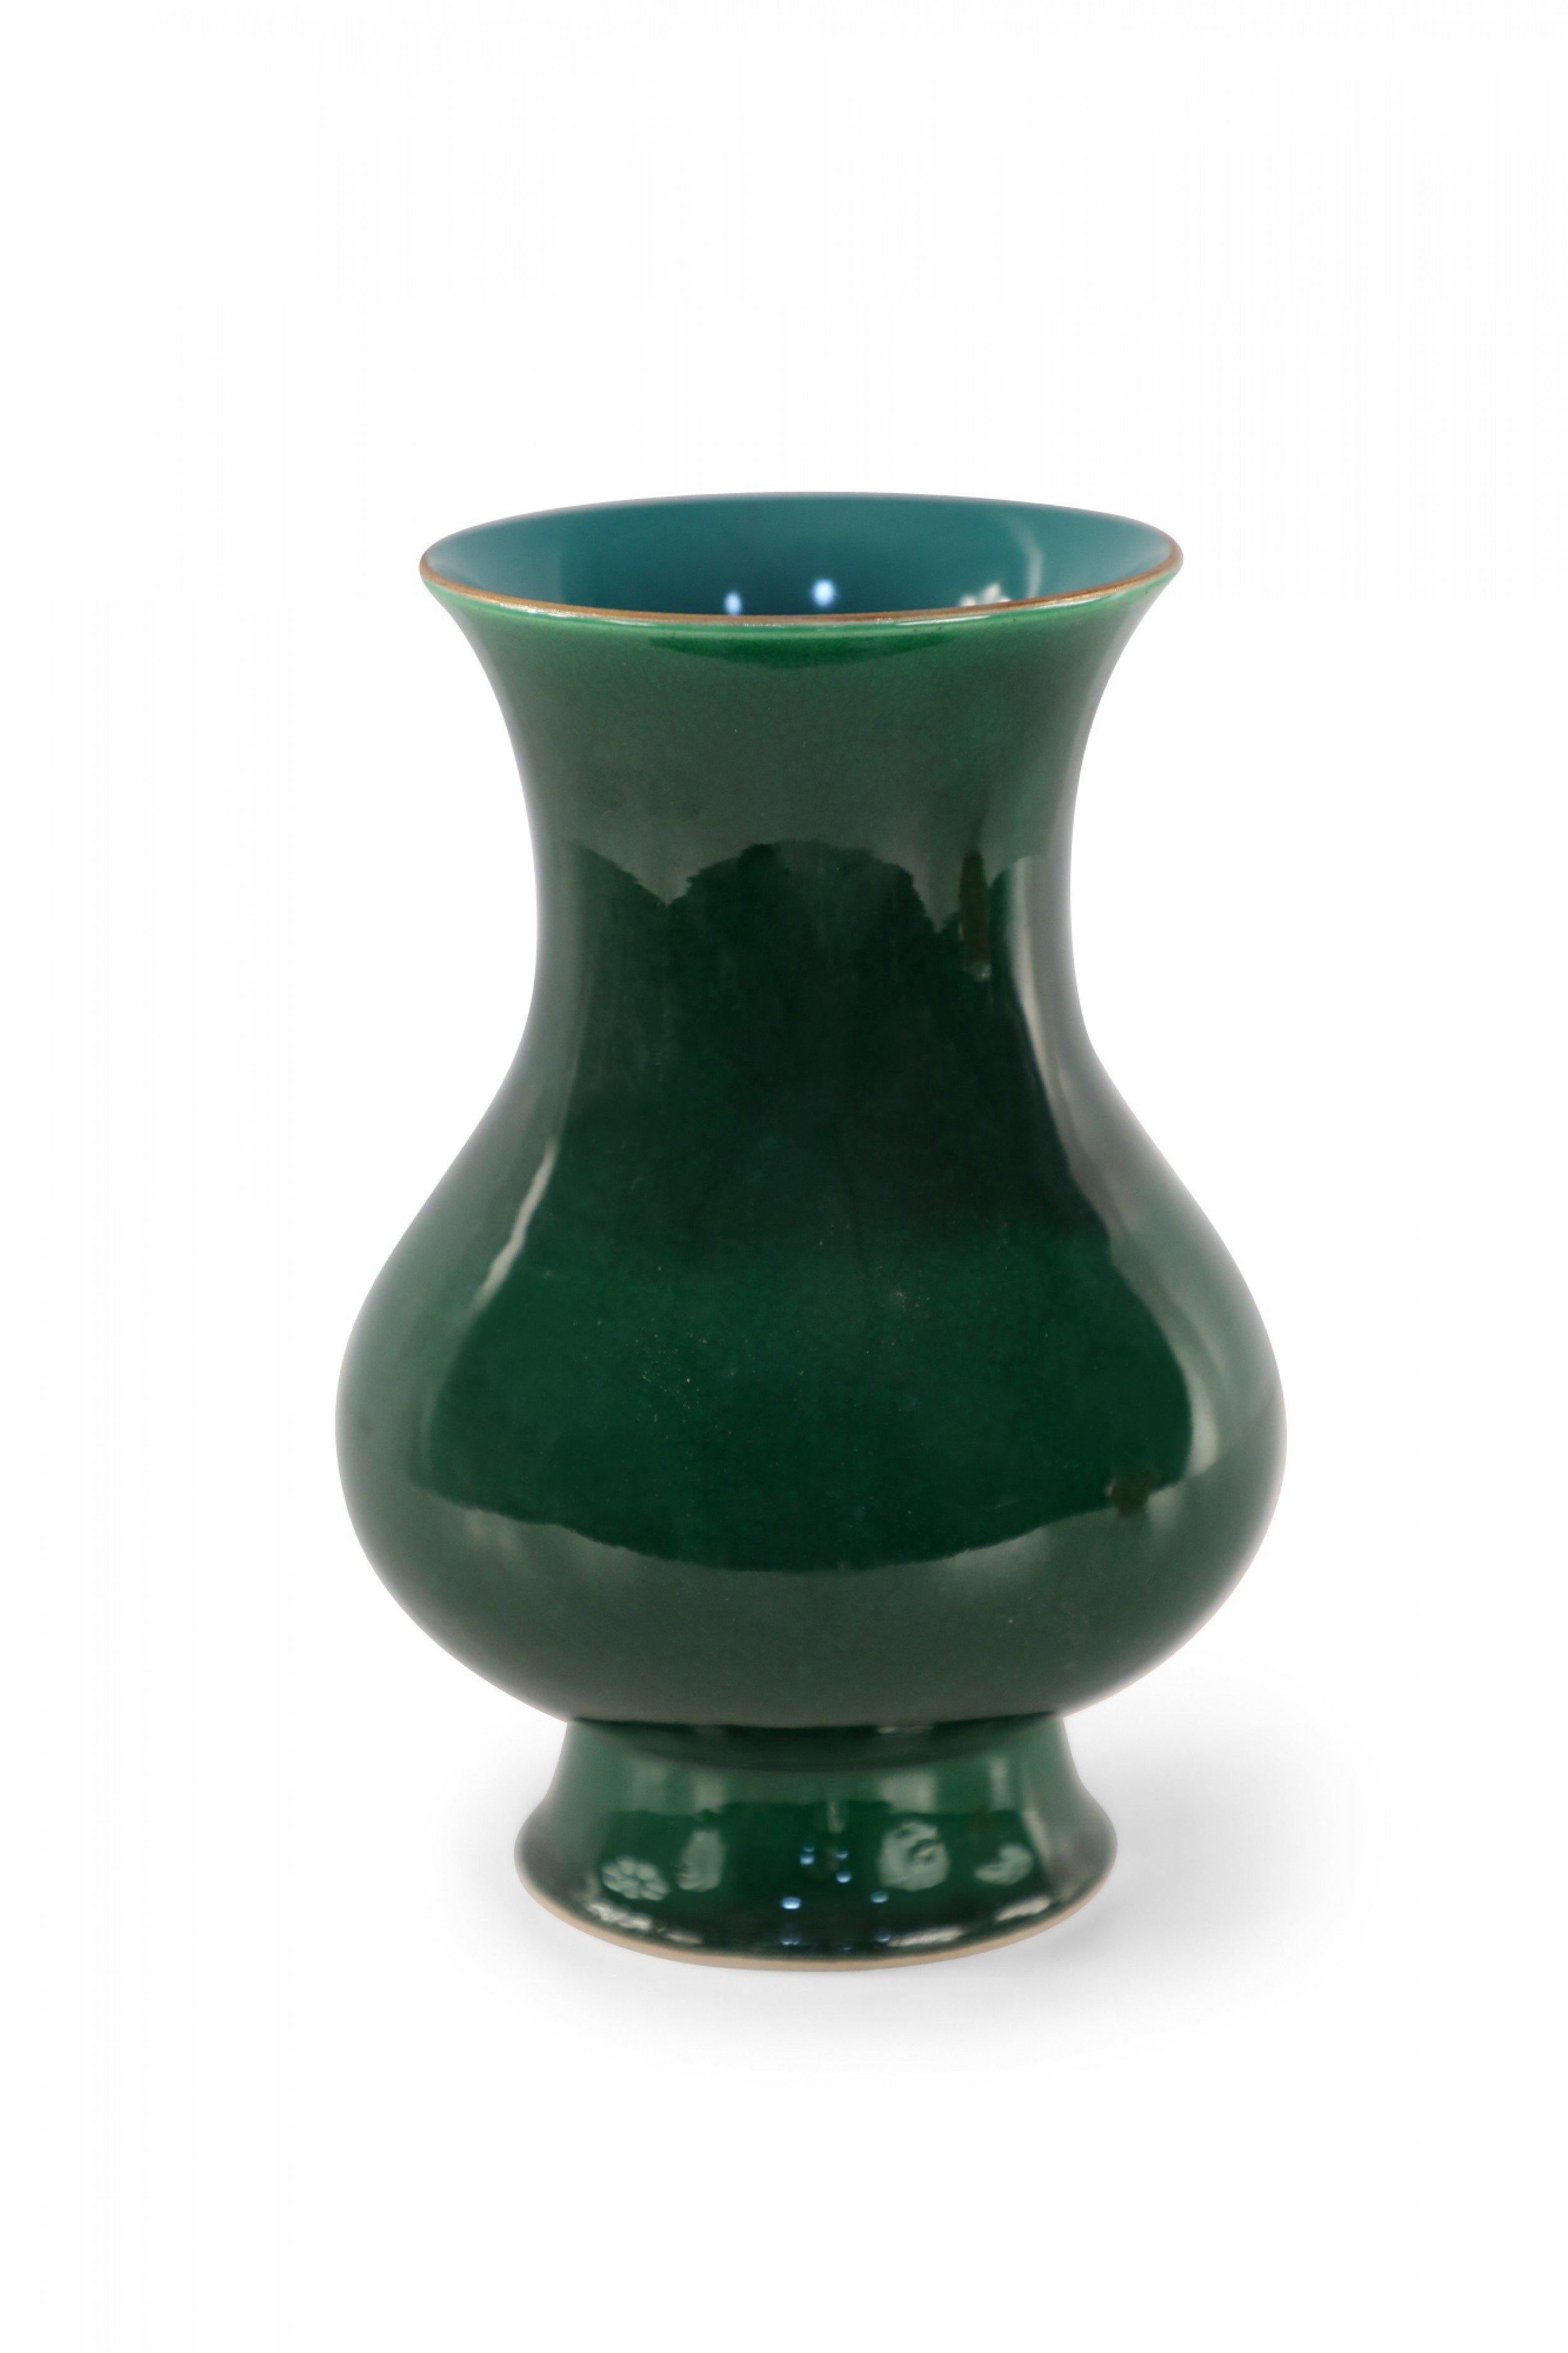 Chinese bulbous footed porcelain vase crafted in the Lang kiln (Langyao) in a dazzling and uniform emerald green glaze with a strong glass-like luster, shifting to a subtly varied light blue on the interior.